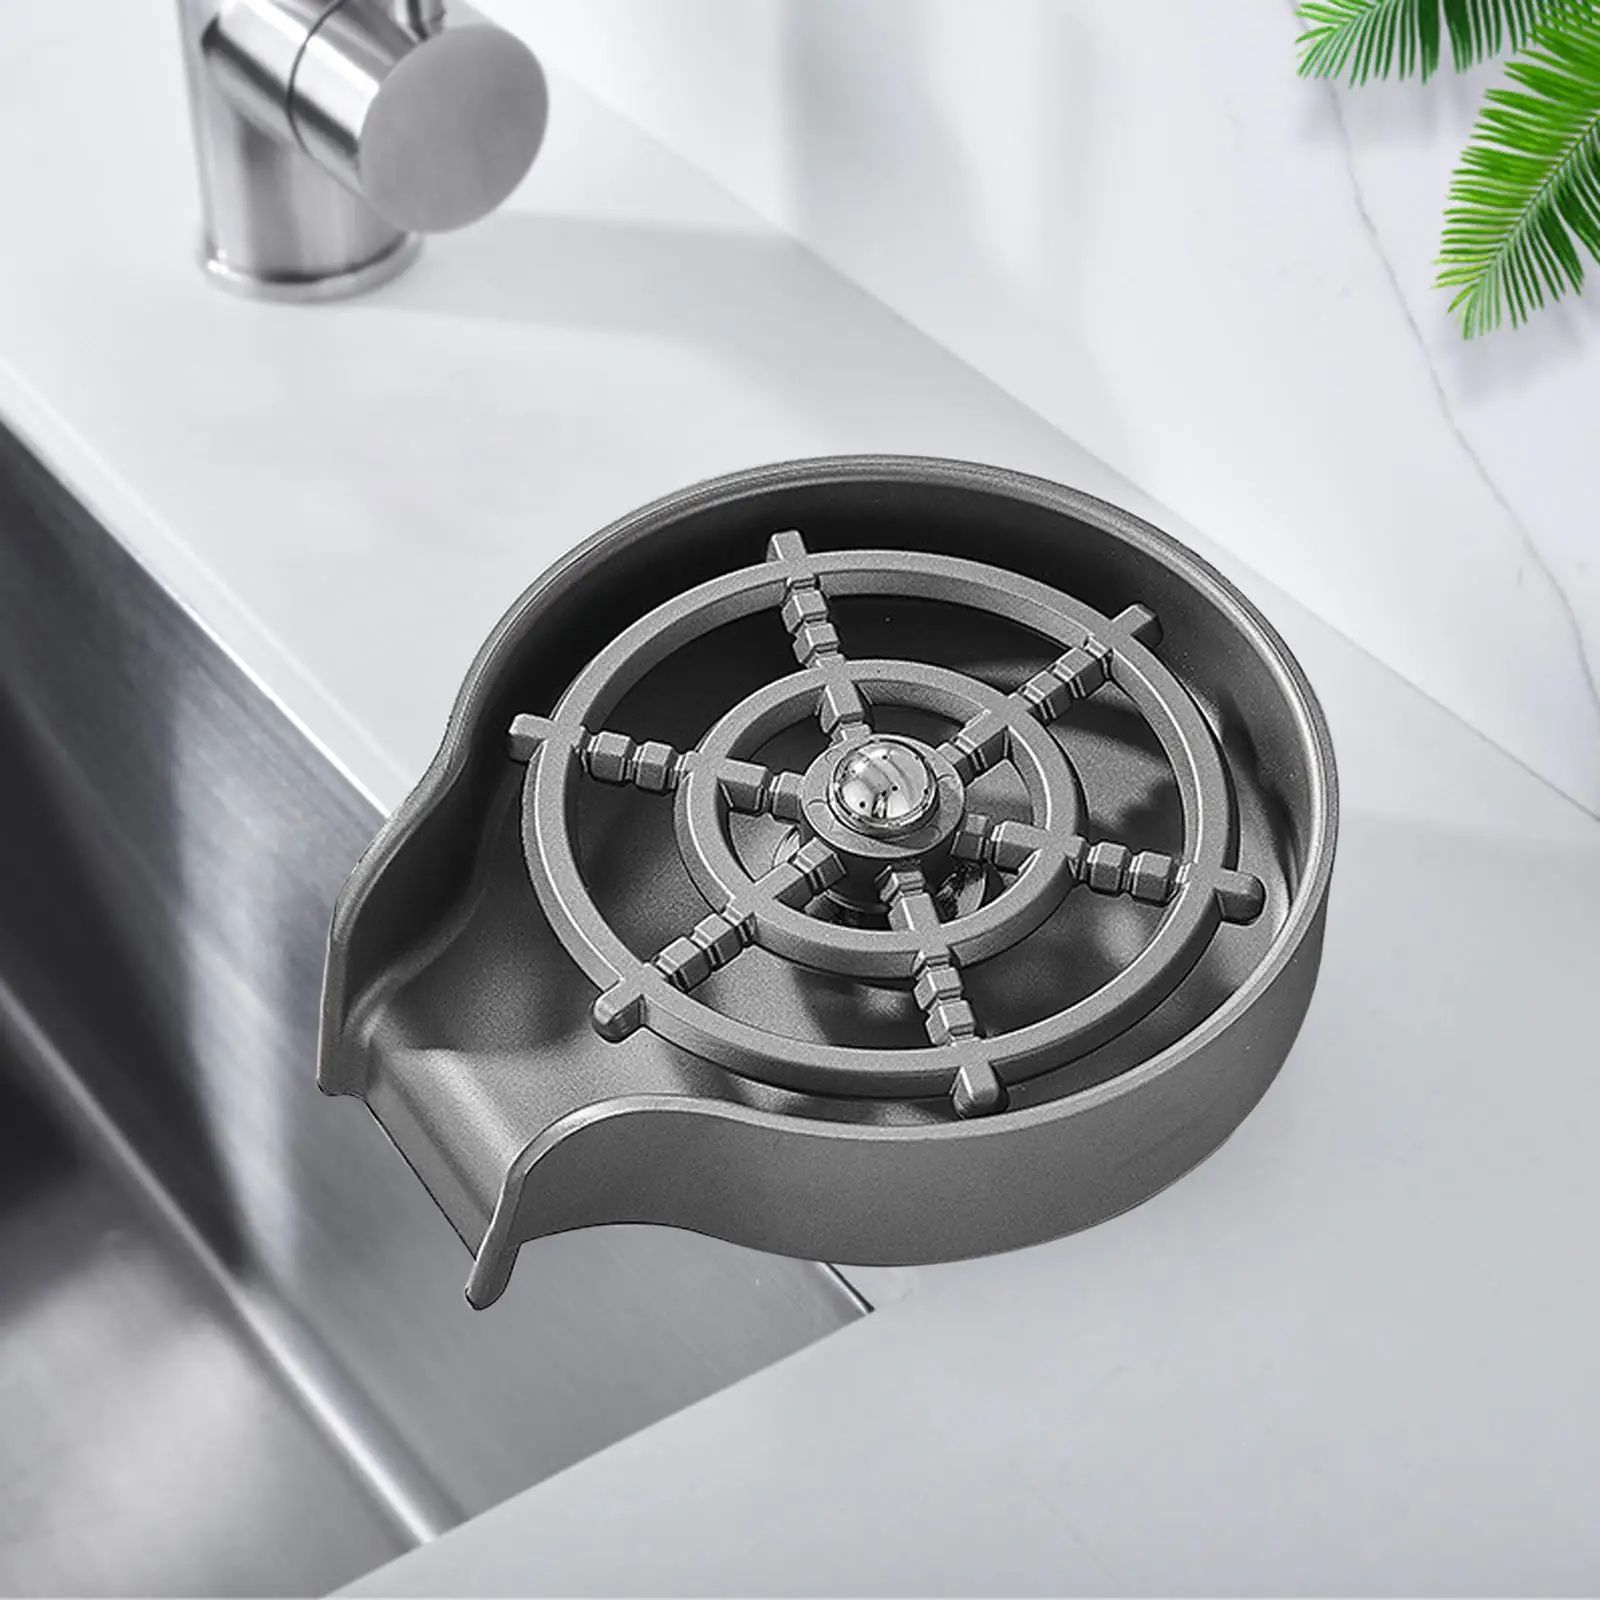 Kitchen Sink Automatic Flushing Device Kitchen Sink Cup Accessories High